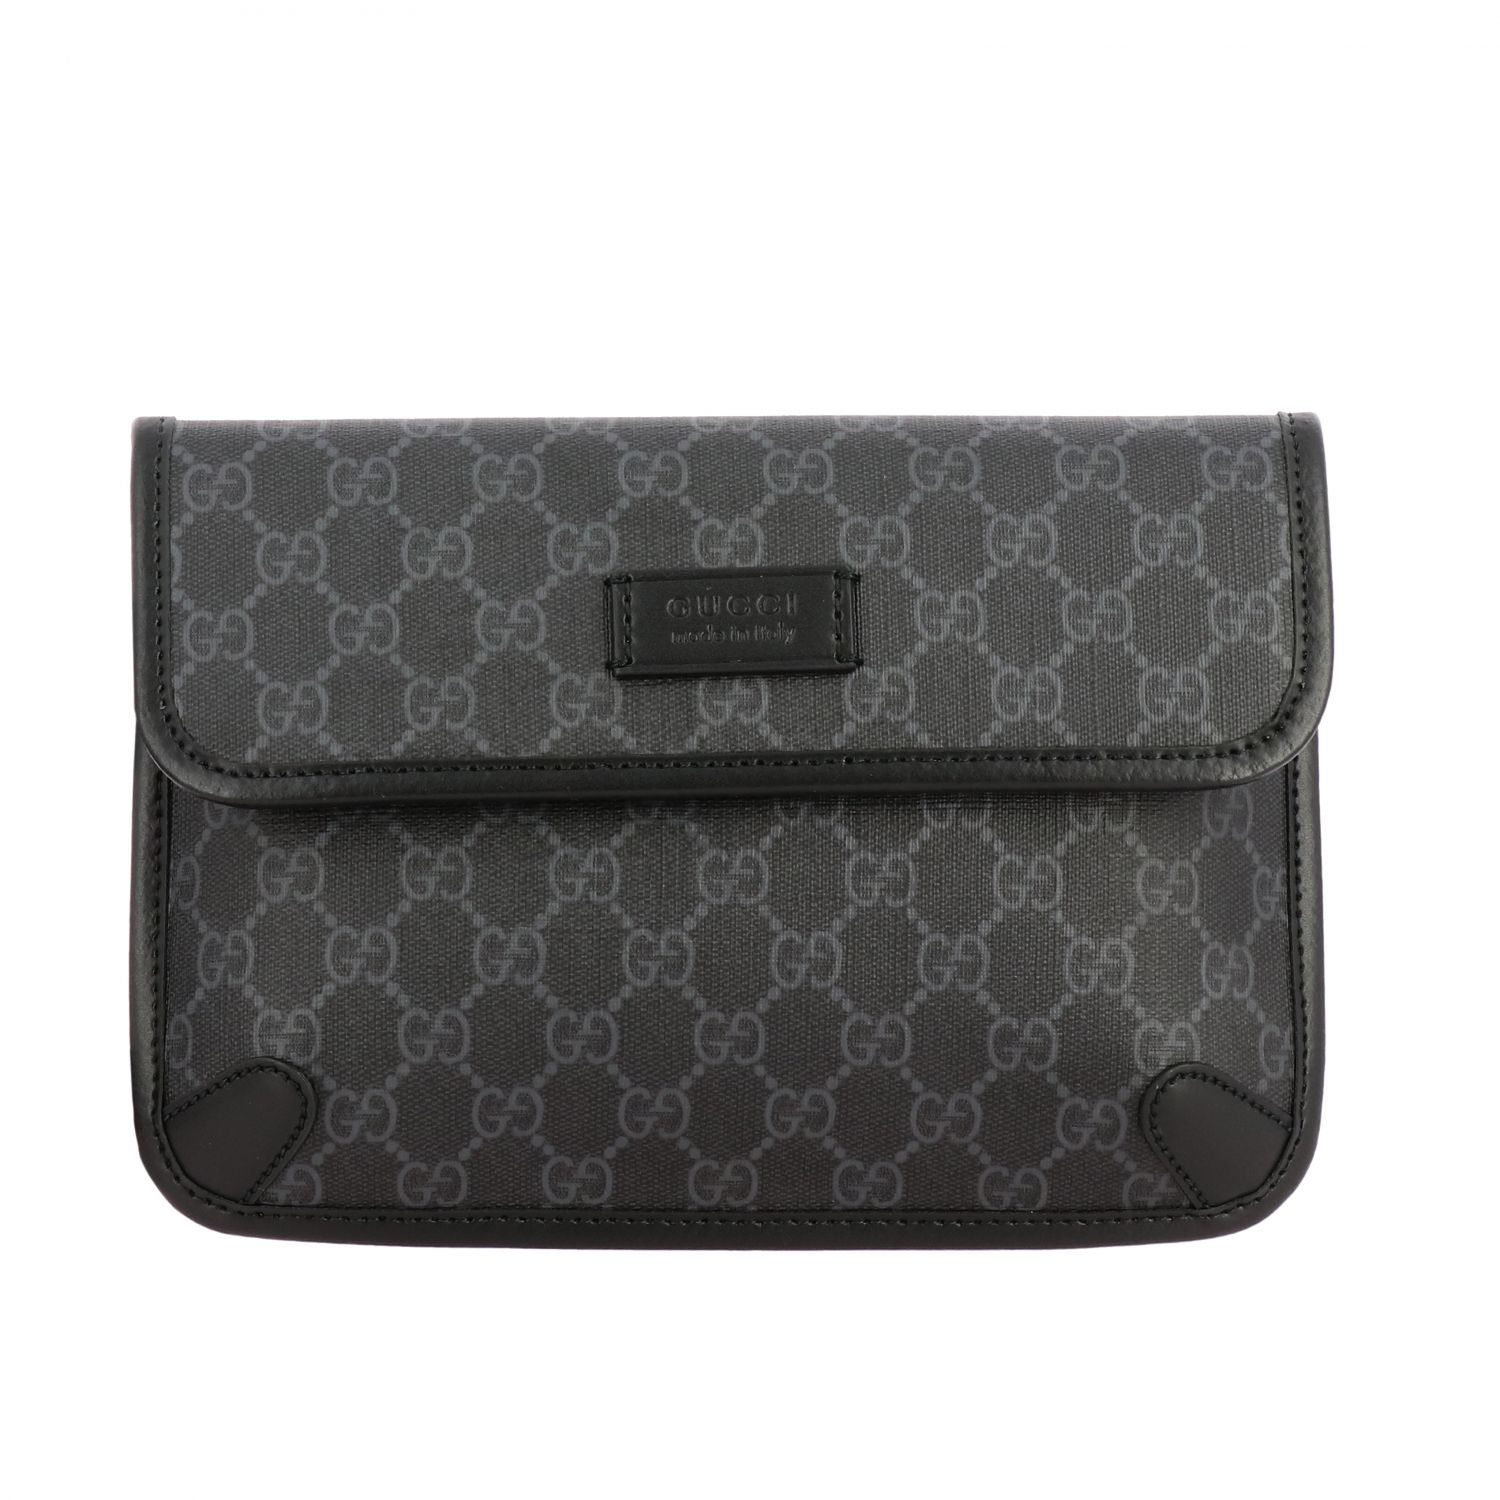 GUCCI: pouch in GG Supreme leather - Black  Gucci belt bag 598113 K5RLN  online at